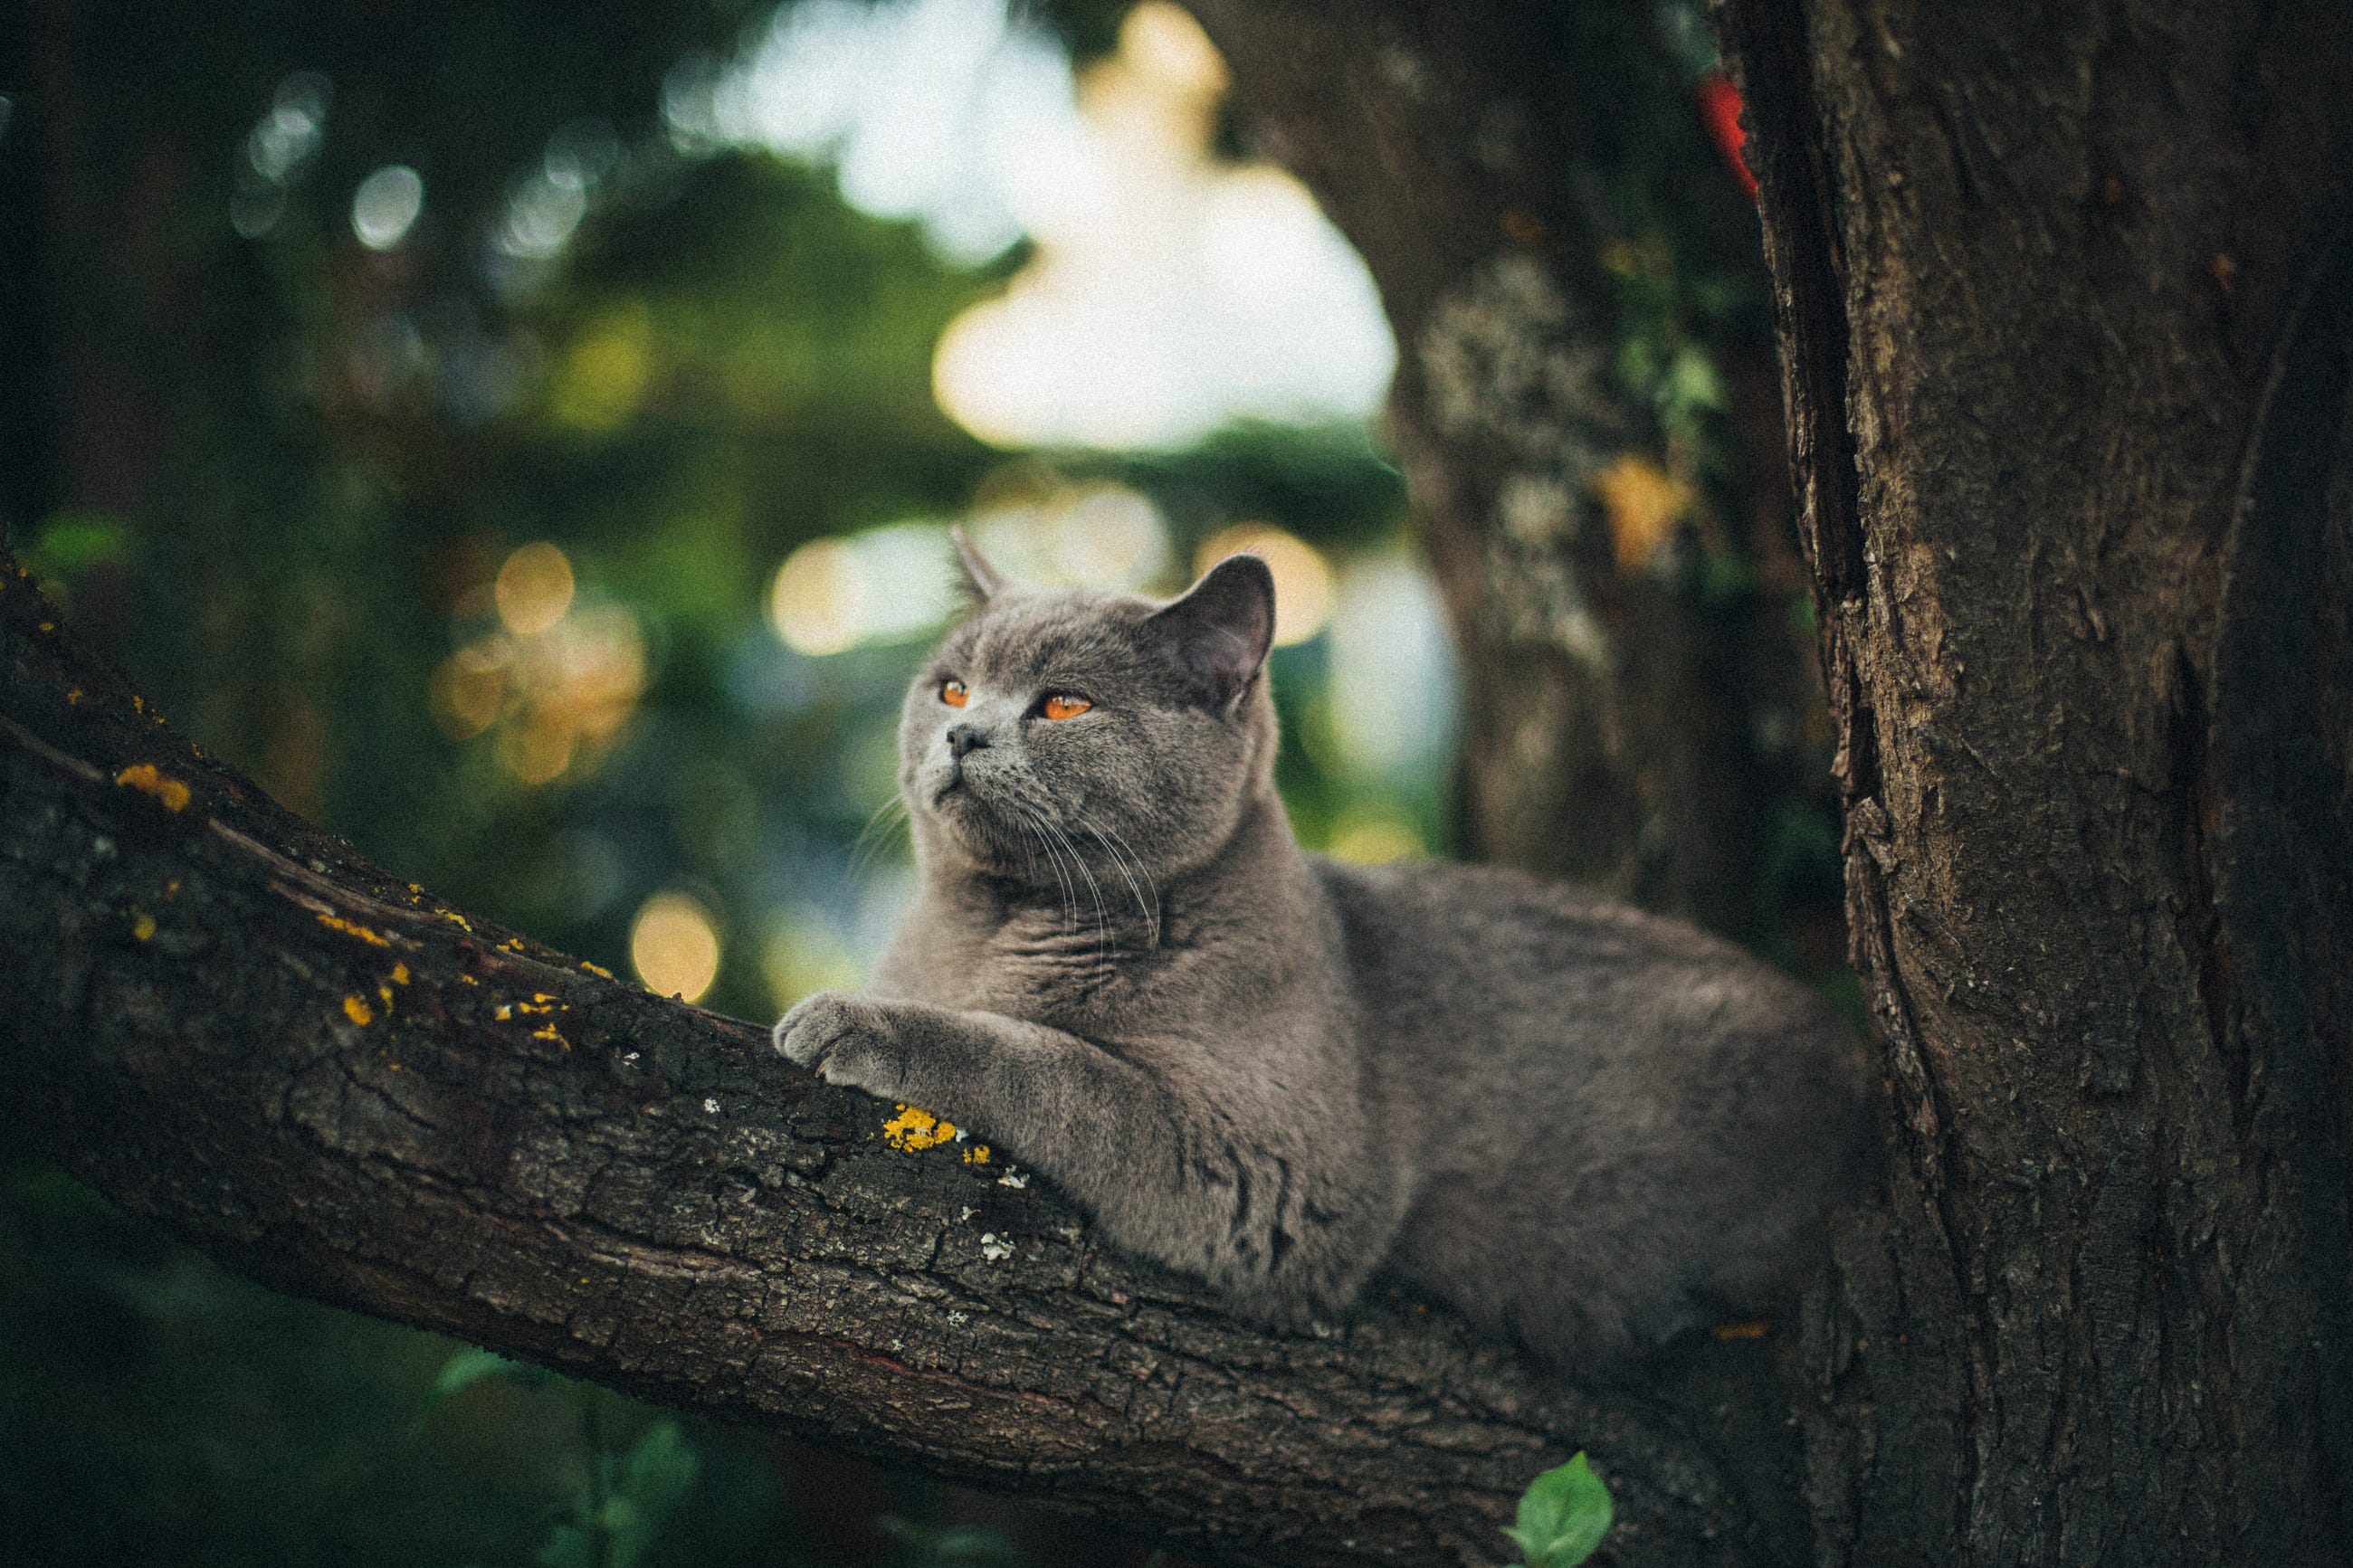 4 Lessons Learned From Trying to Make My Cat an Influencer